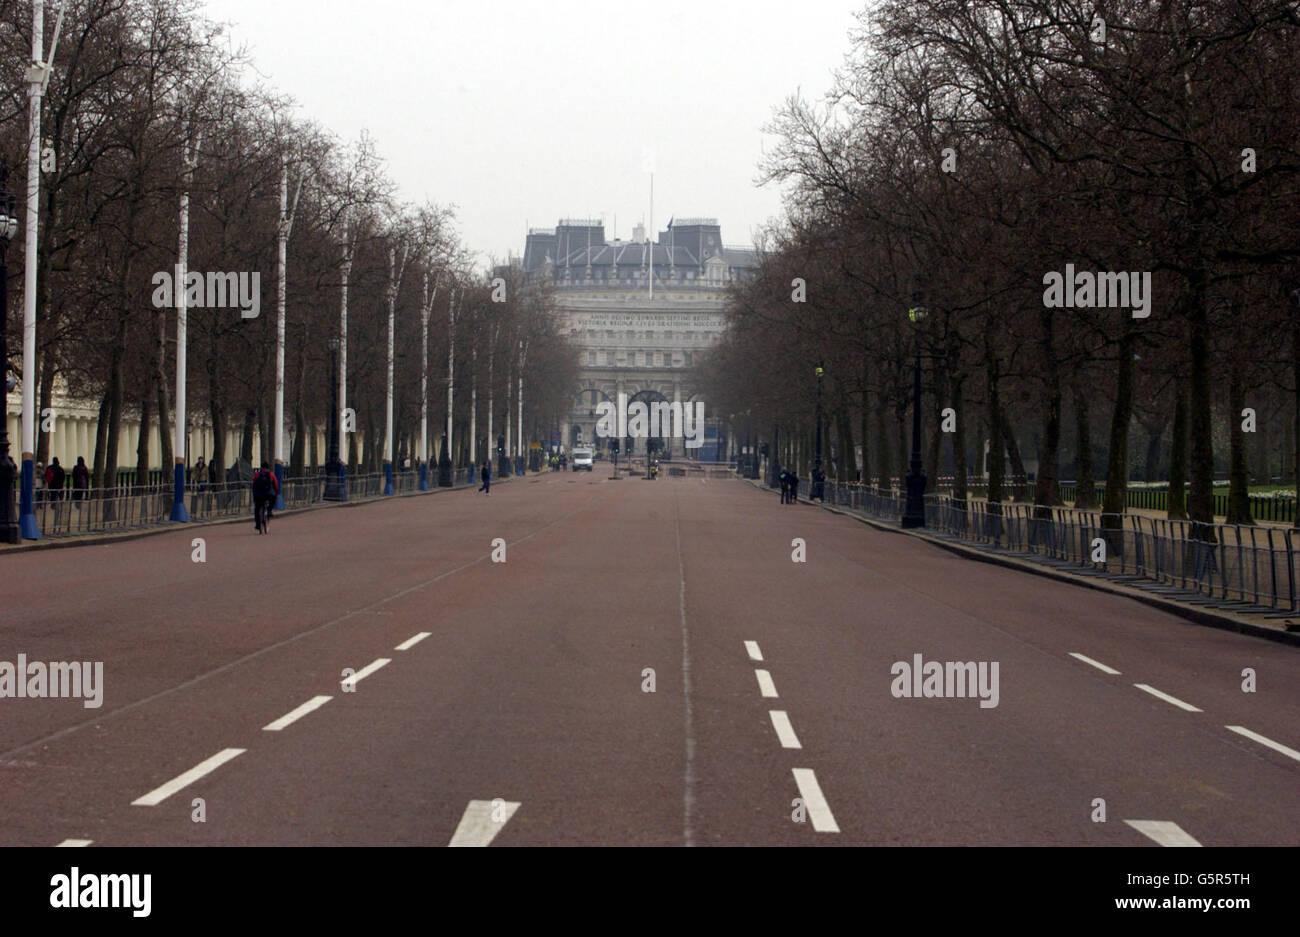 A view along The Mall looking towards Admiralty Arch. The procession carrying the Queen Mother's funeral will pass along The Mall before turning off to cross Horse Guards Parade en route to Westminster Hall where she will lie in State until her funerall. Stock Photo